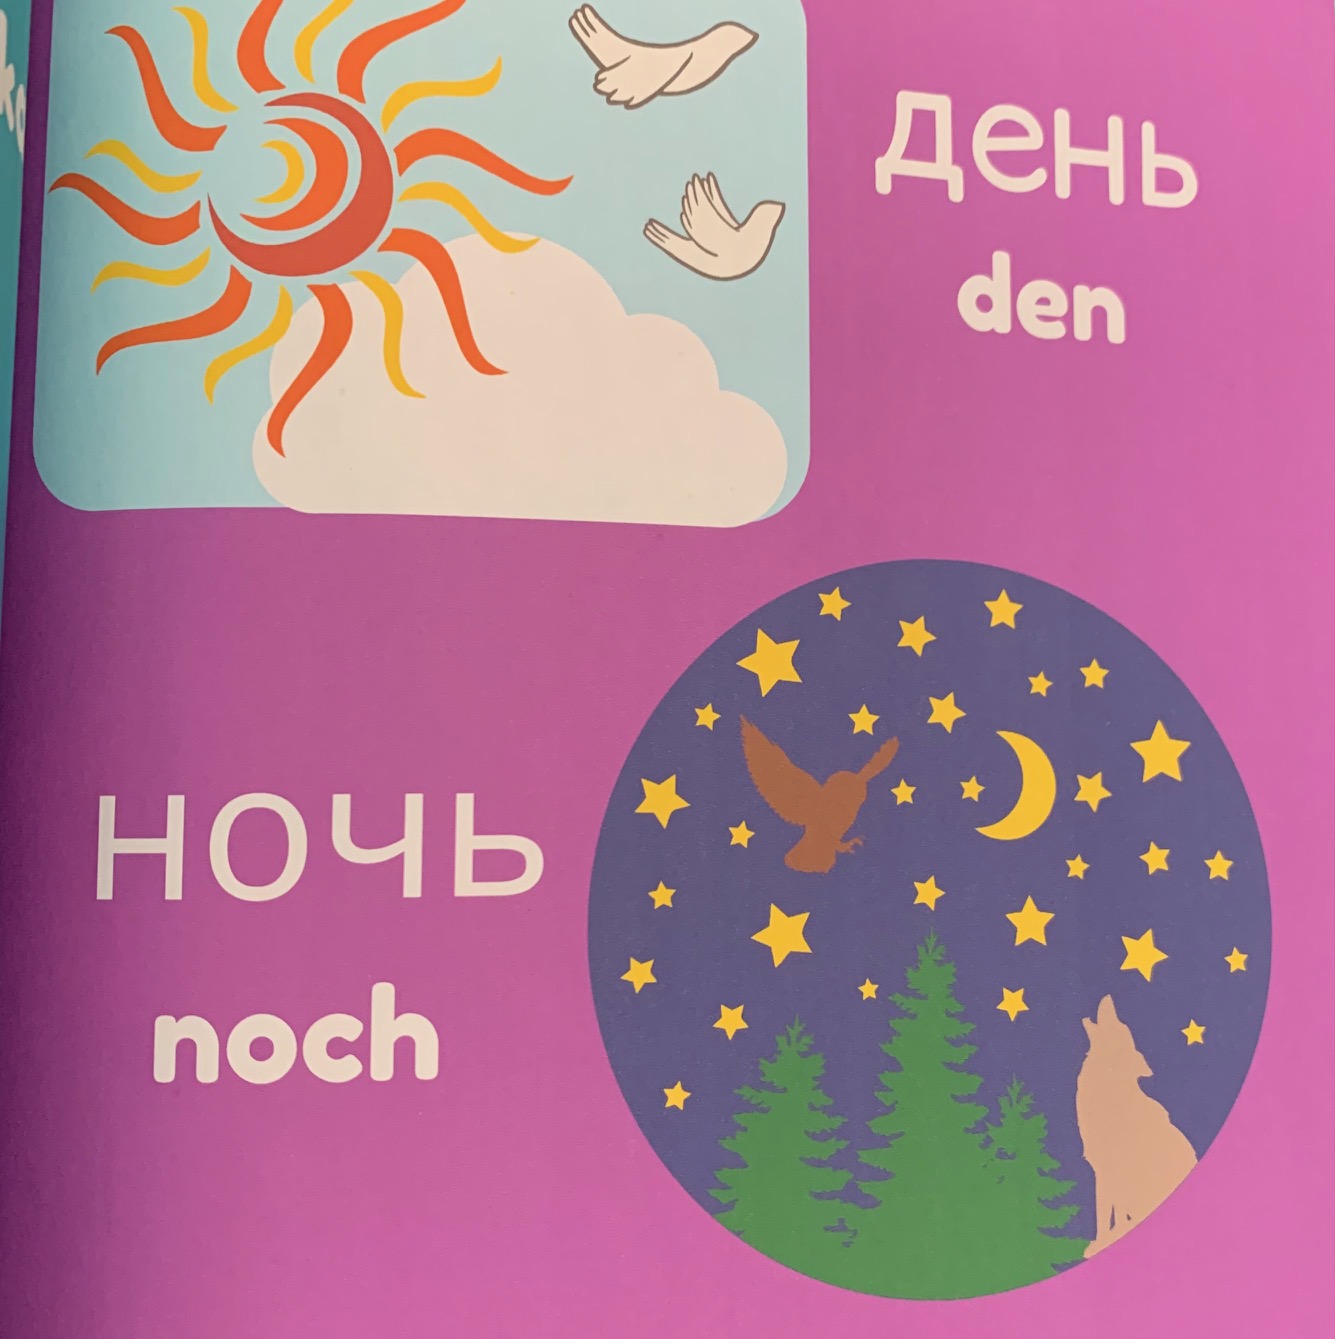 A Russian book of opposites